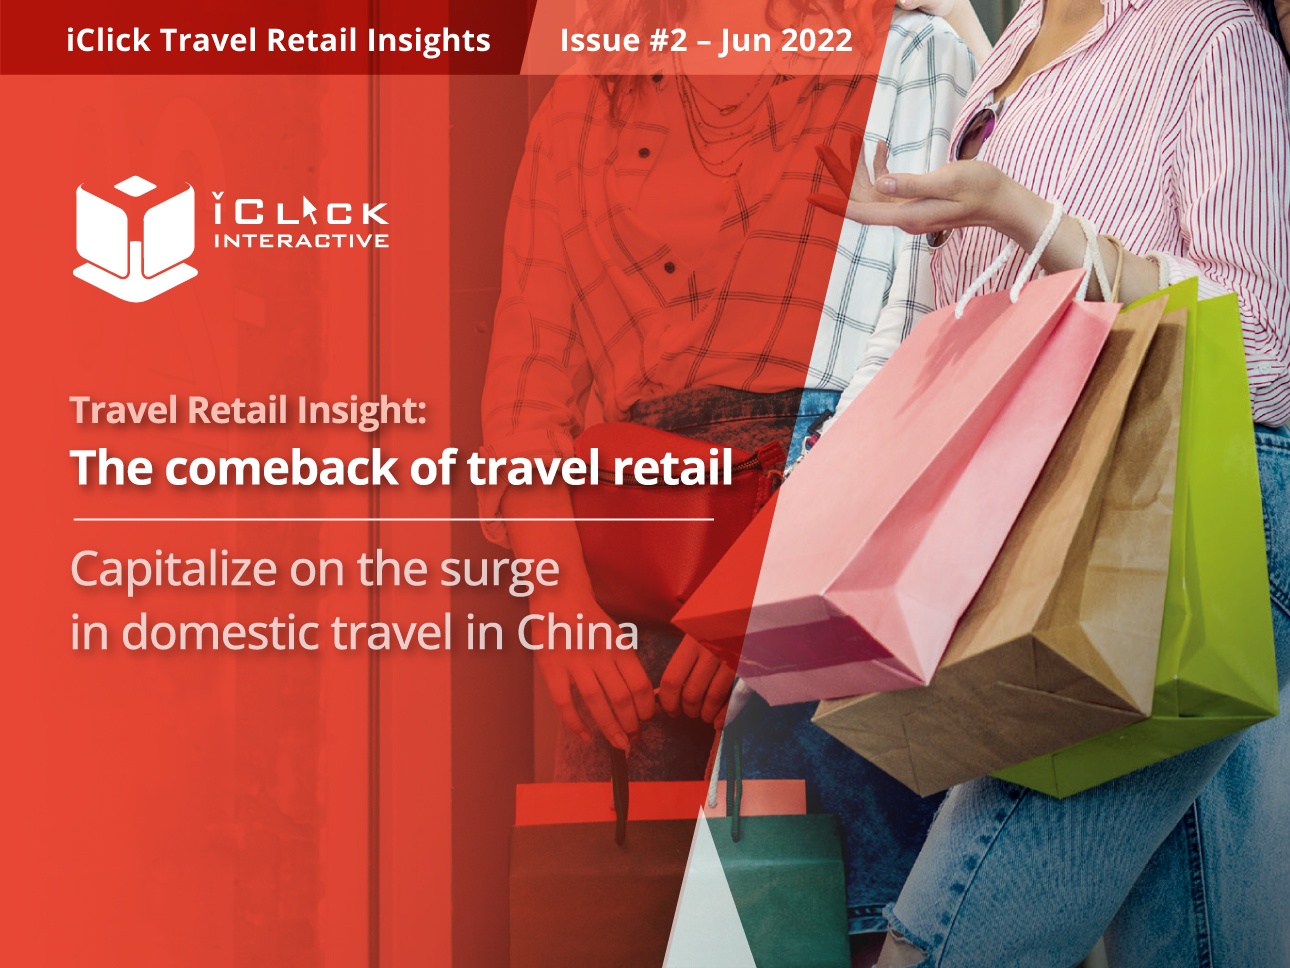 iClick Travel Retail Insights – Issue #2 The comeback of travel retail: Capitalize on the surge in domestic travel in China￼